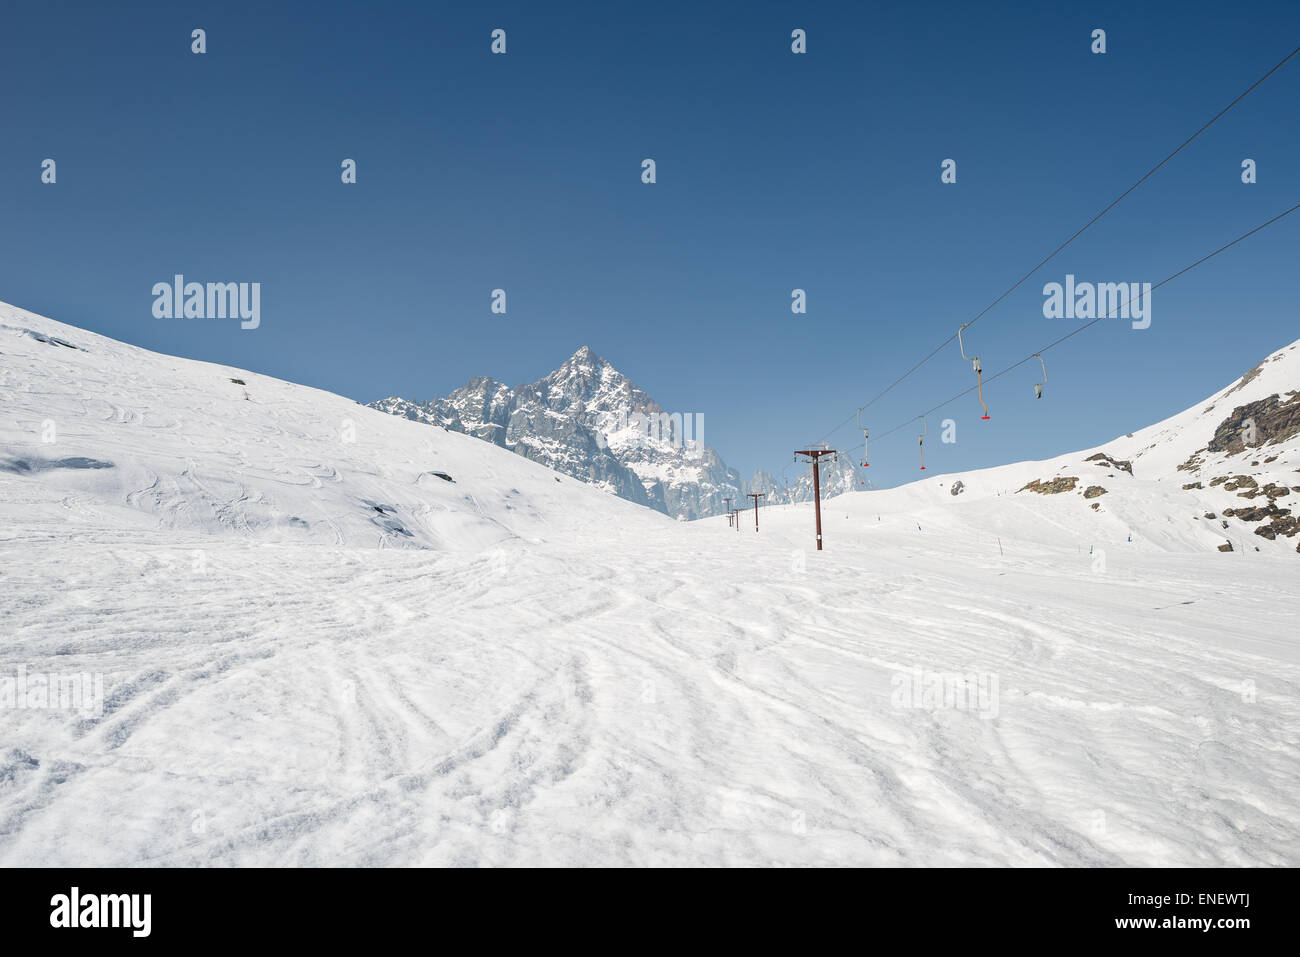 Ski resort with stunning view of high mountain peaks in the italian alpine arc, in a bright sunny day. Empty skilift. Stock Photo